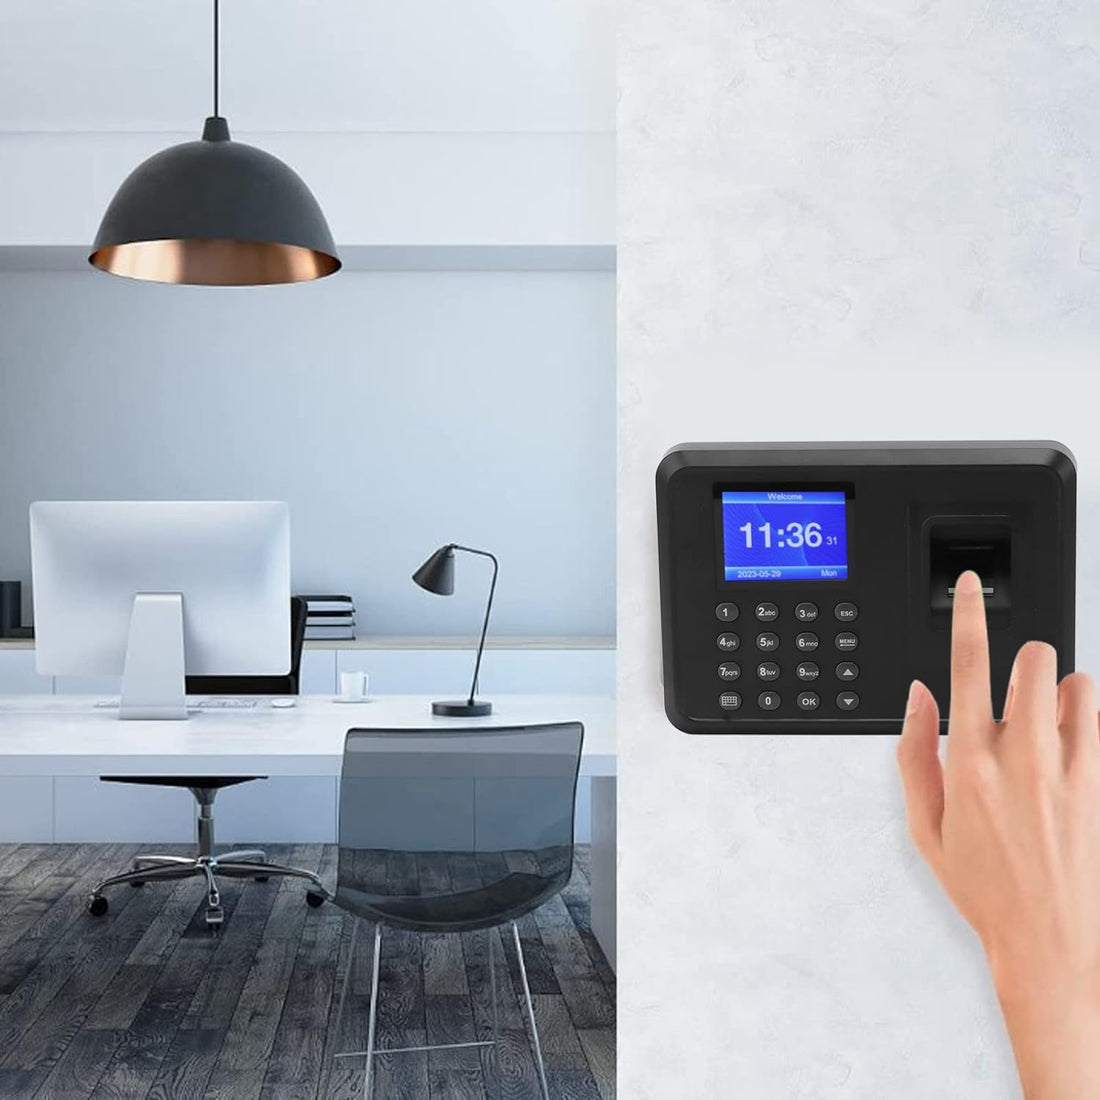 TOPINCN Intelligent Biometric Fingerprint Password Attendance Machine, Employee Checking in Recorder, Time Clocks for Small Business Clock in and Out Machine for Employees (100 to 240V) (US Plug)